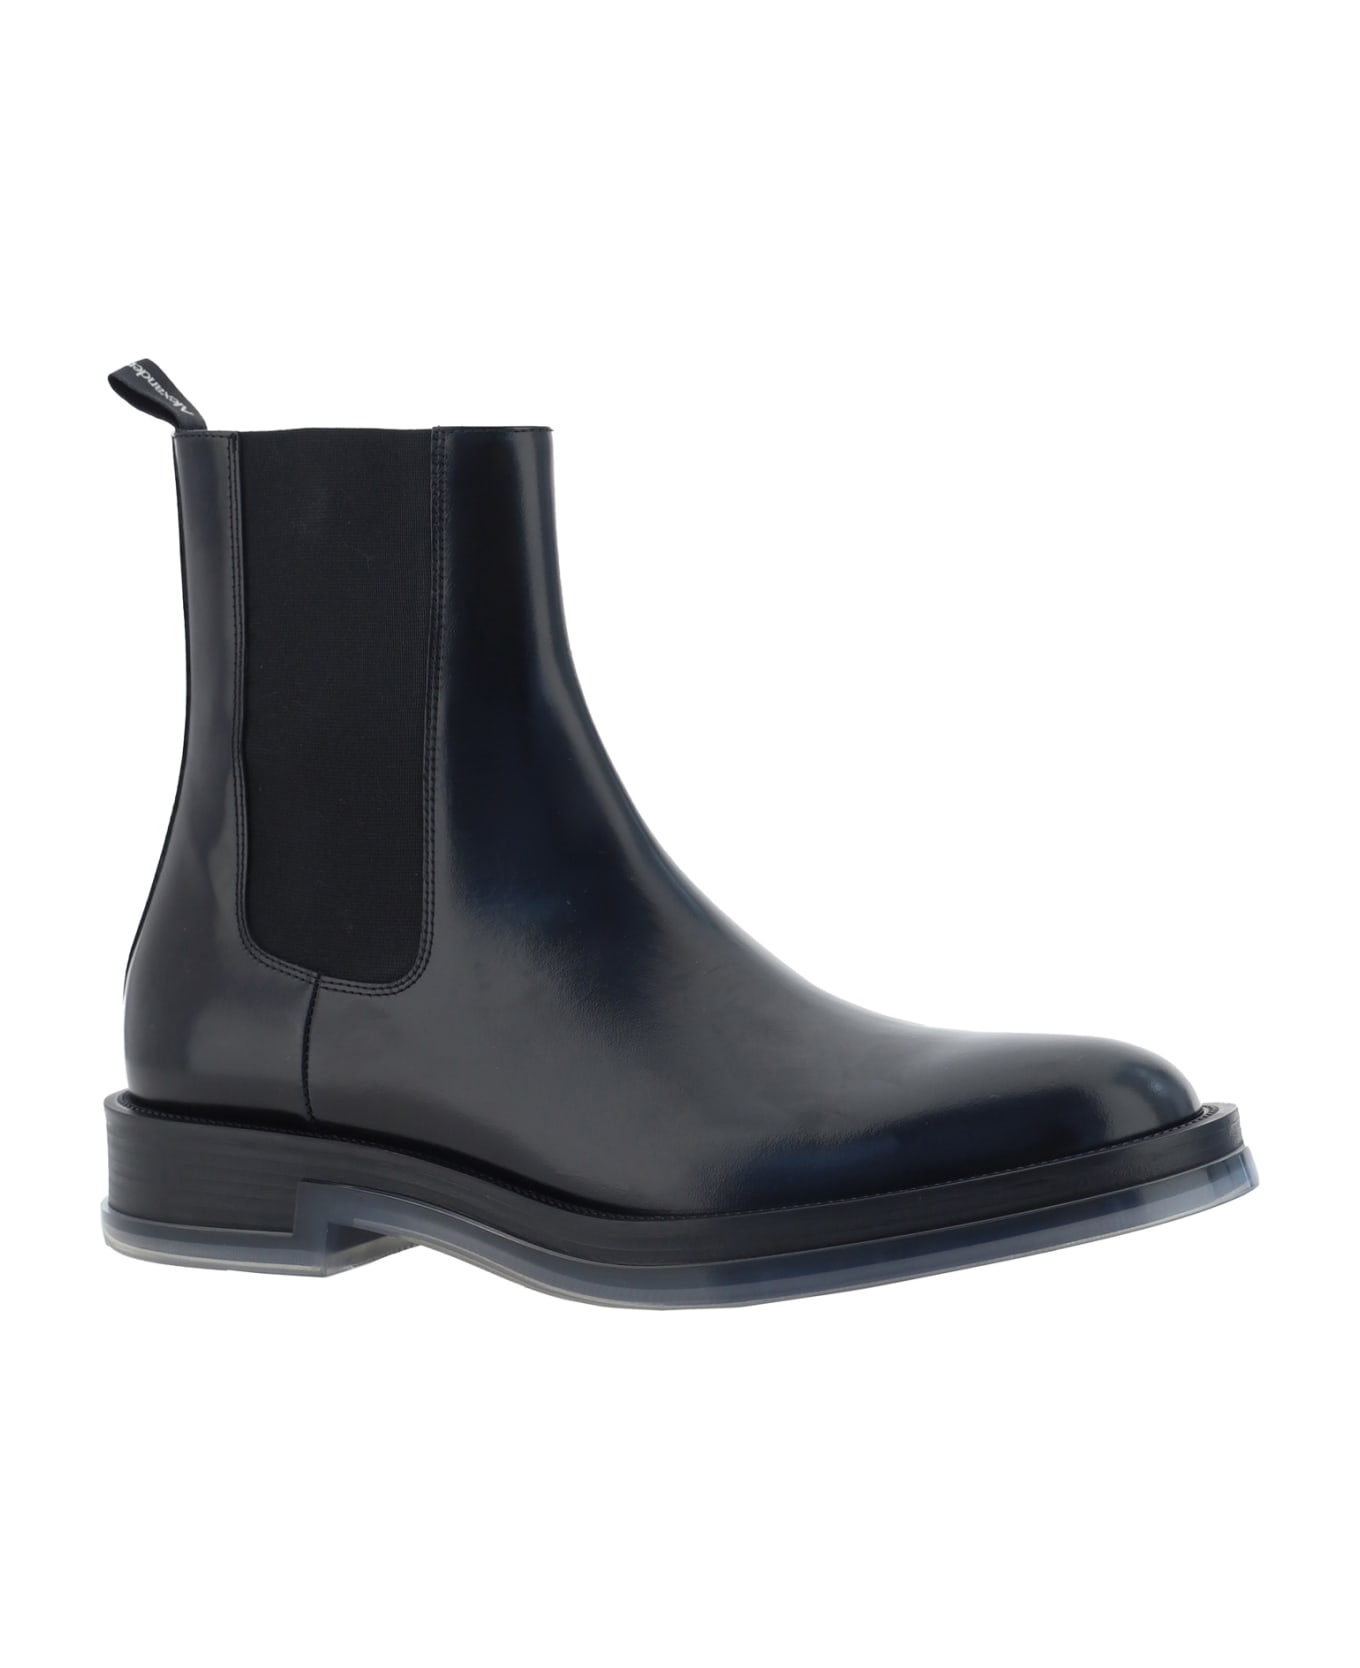 Alexander McQueen Ankle Boots - Black/silver/transpa ブーツ